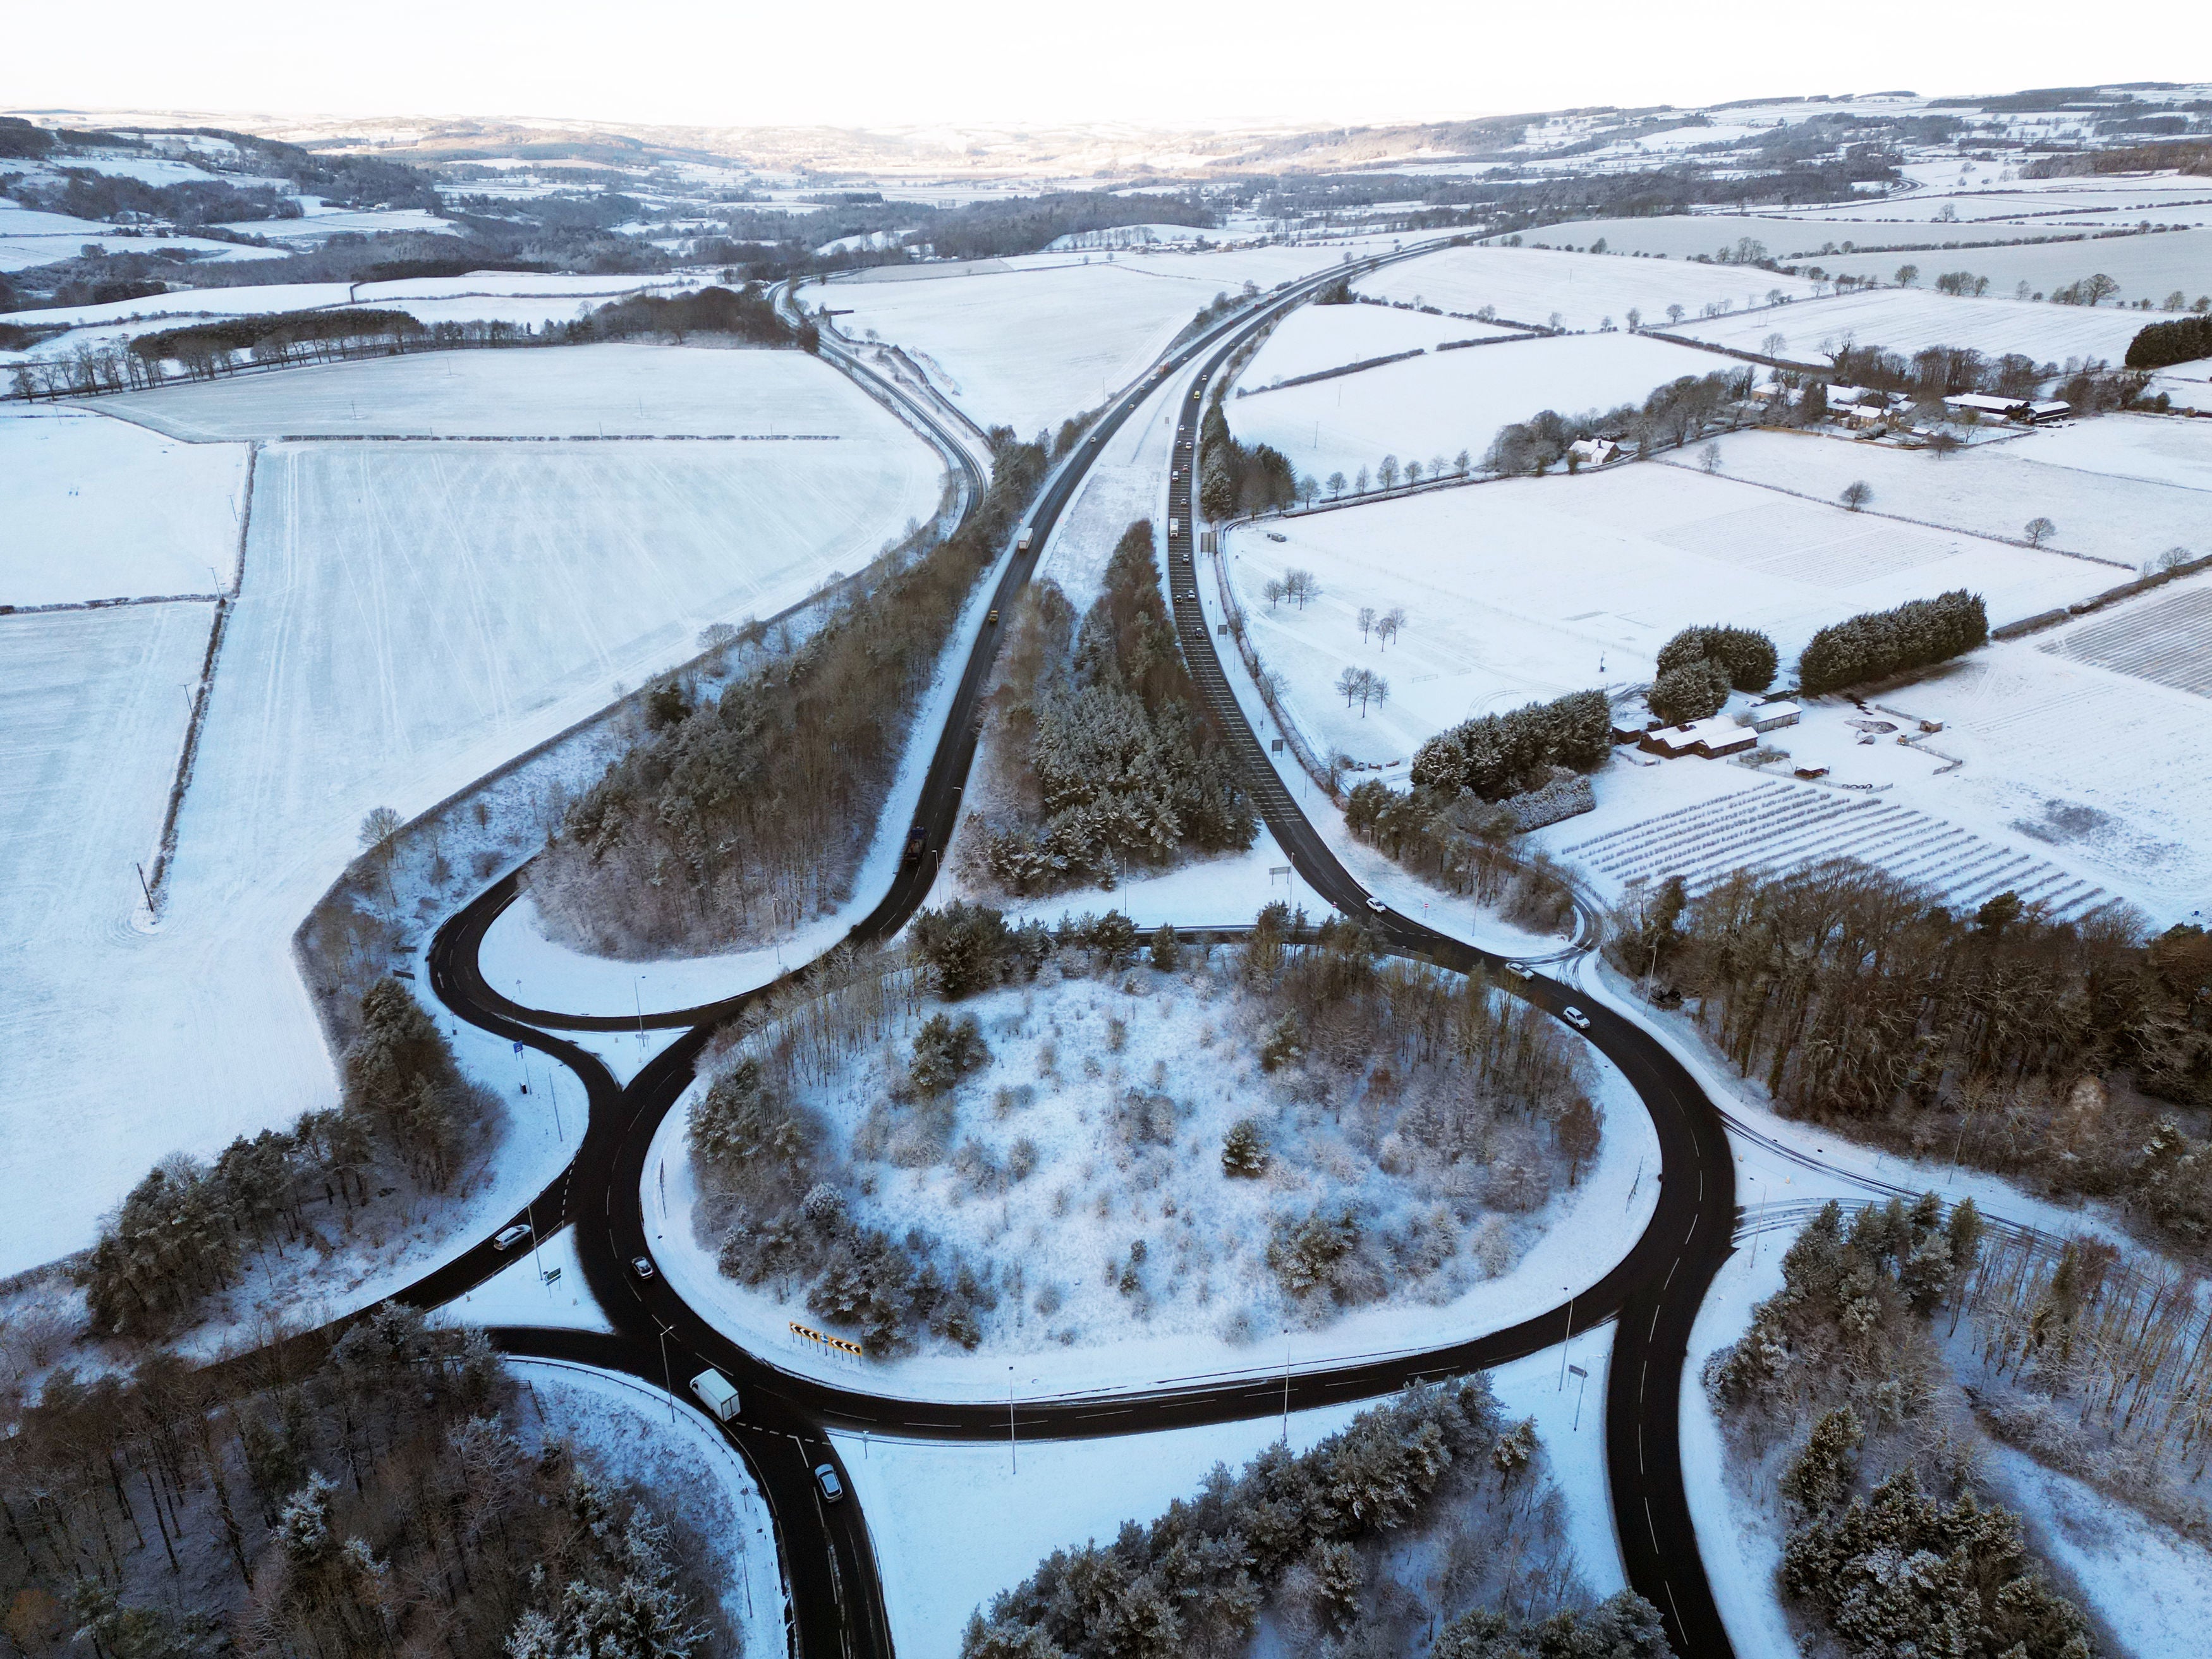 Snowy conditions on the A69 Newcastle to Hexham. Drivers have been warned to leave extra time for their Monday morning commute due to icy roads during rush hour, following a weekend of wintry weather